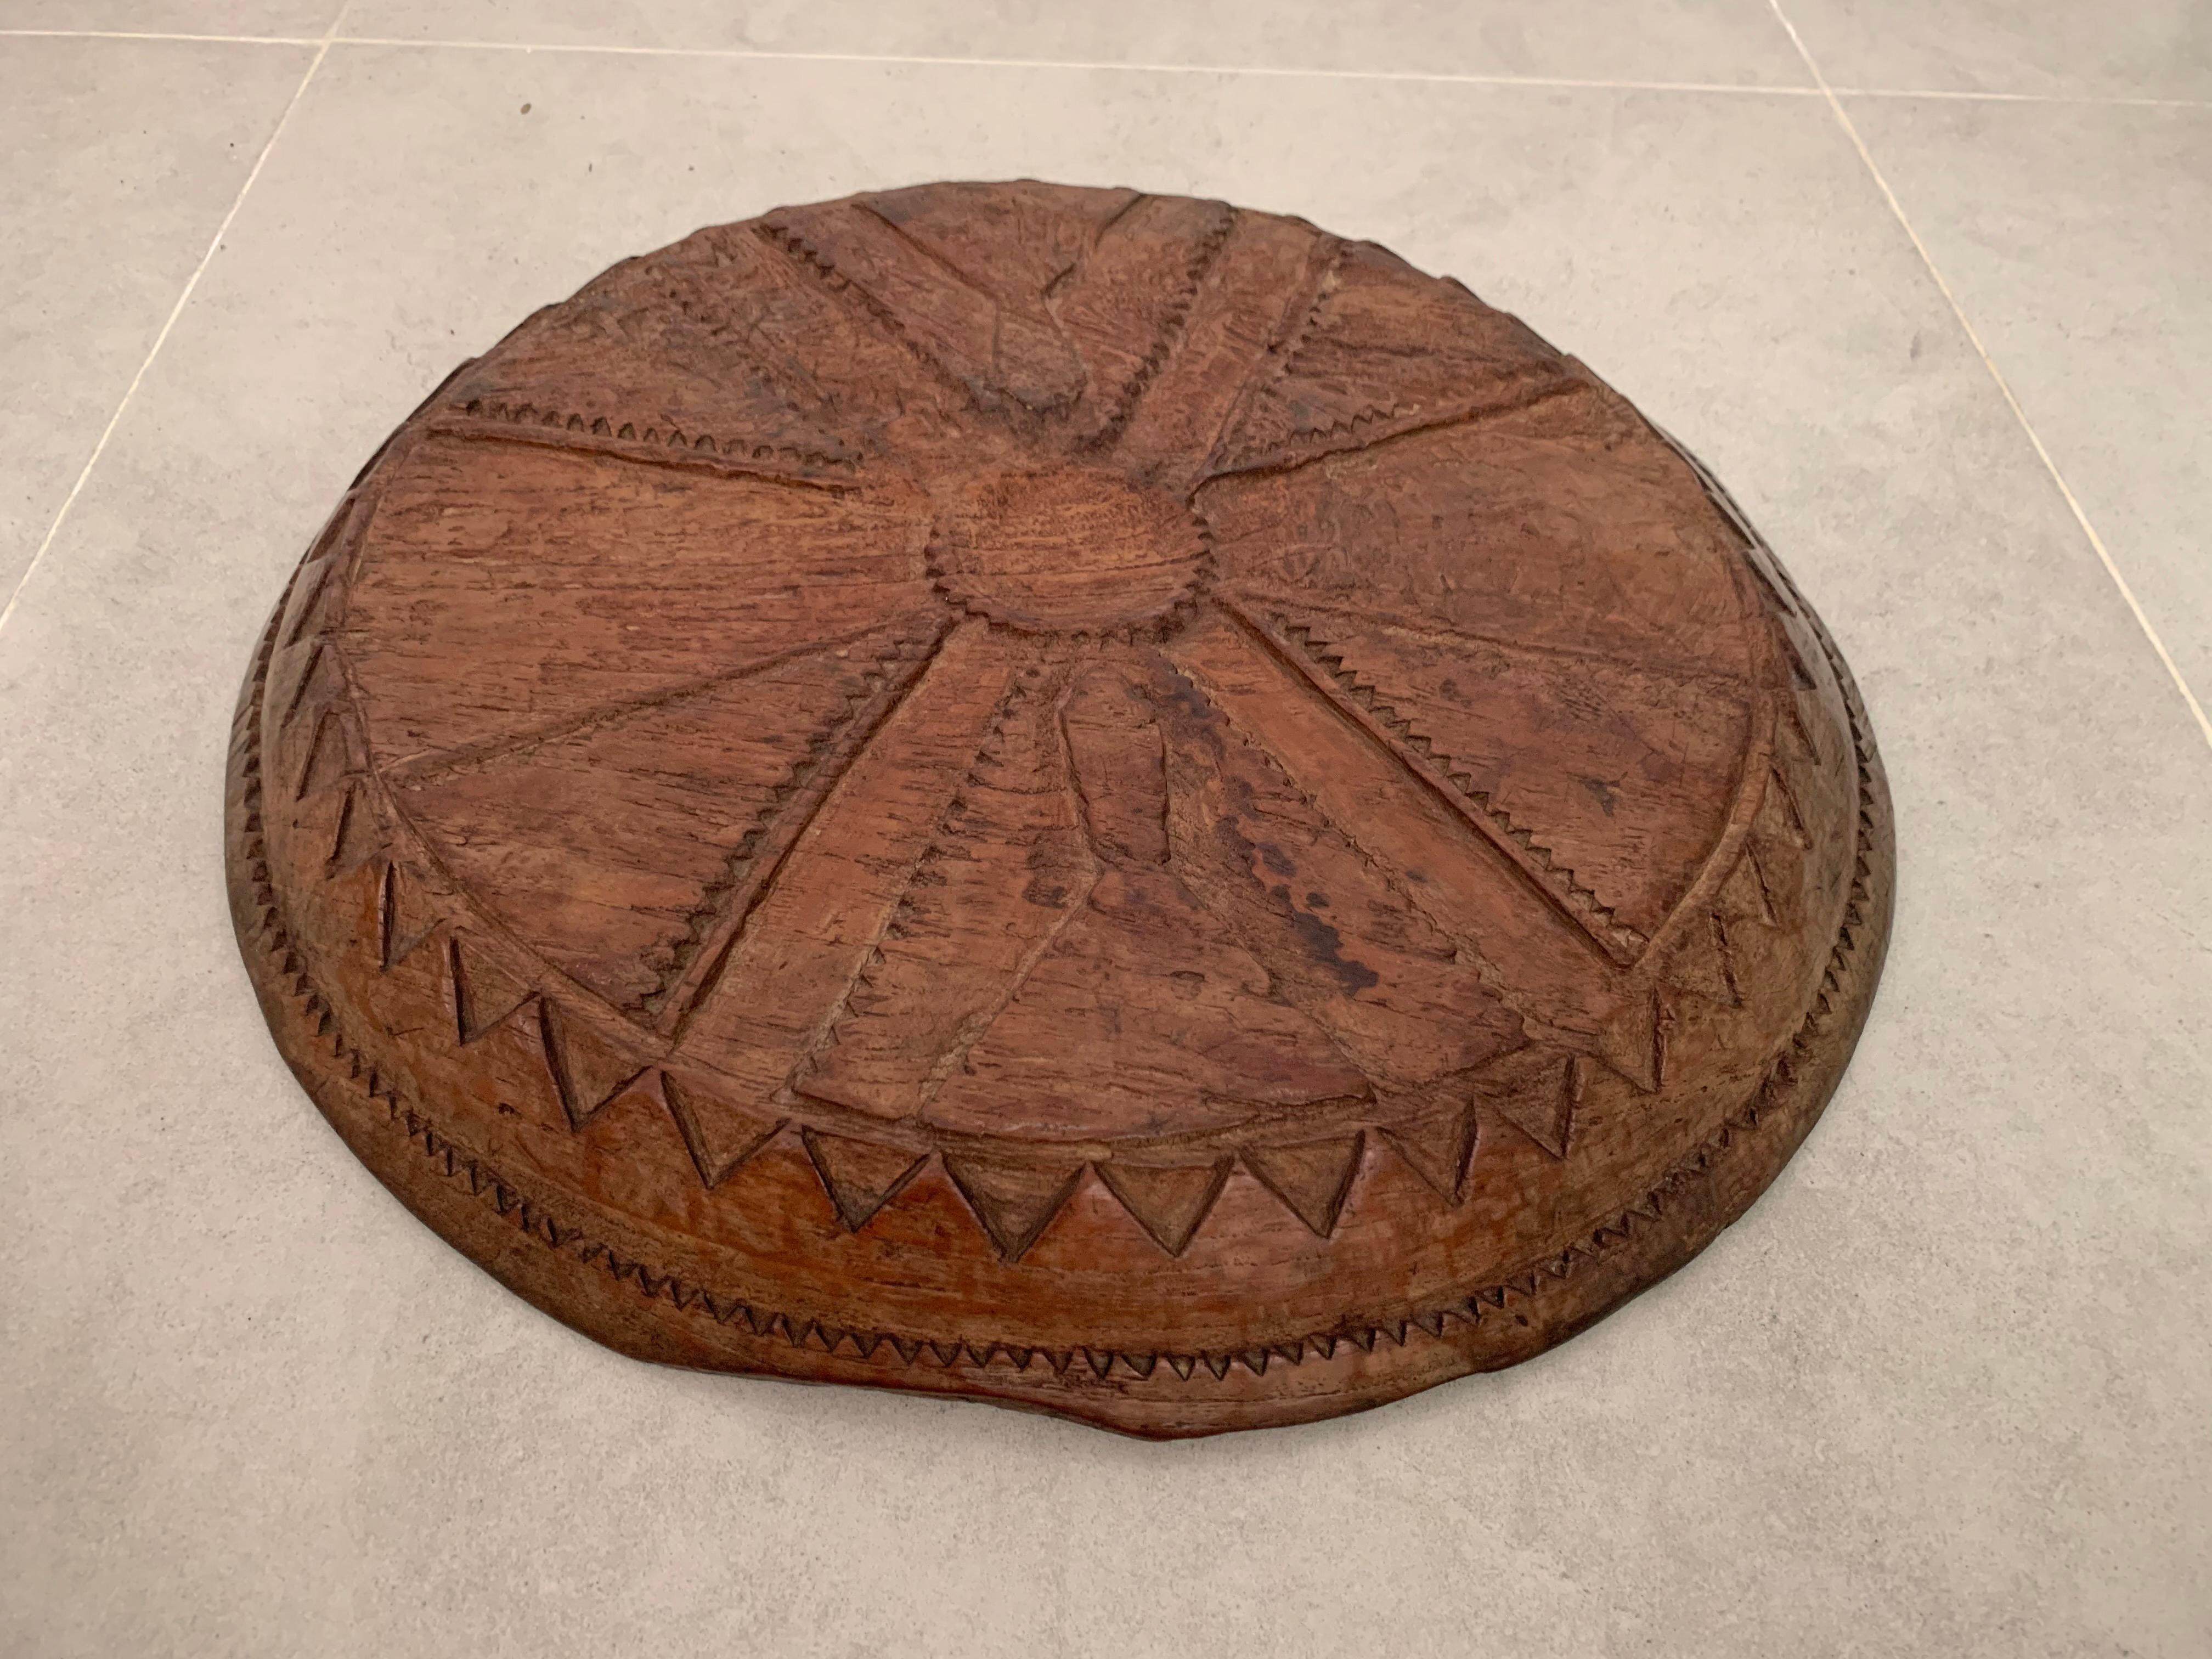 Indonesian Hand-Carved Wooden Tribal Tray / Bowl from the Nias Island, Indonesia For Sale